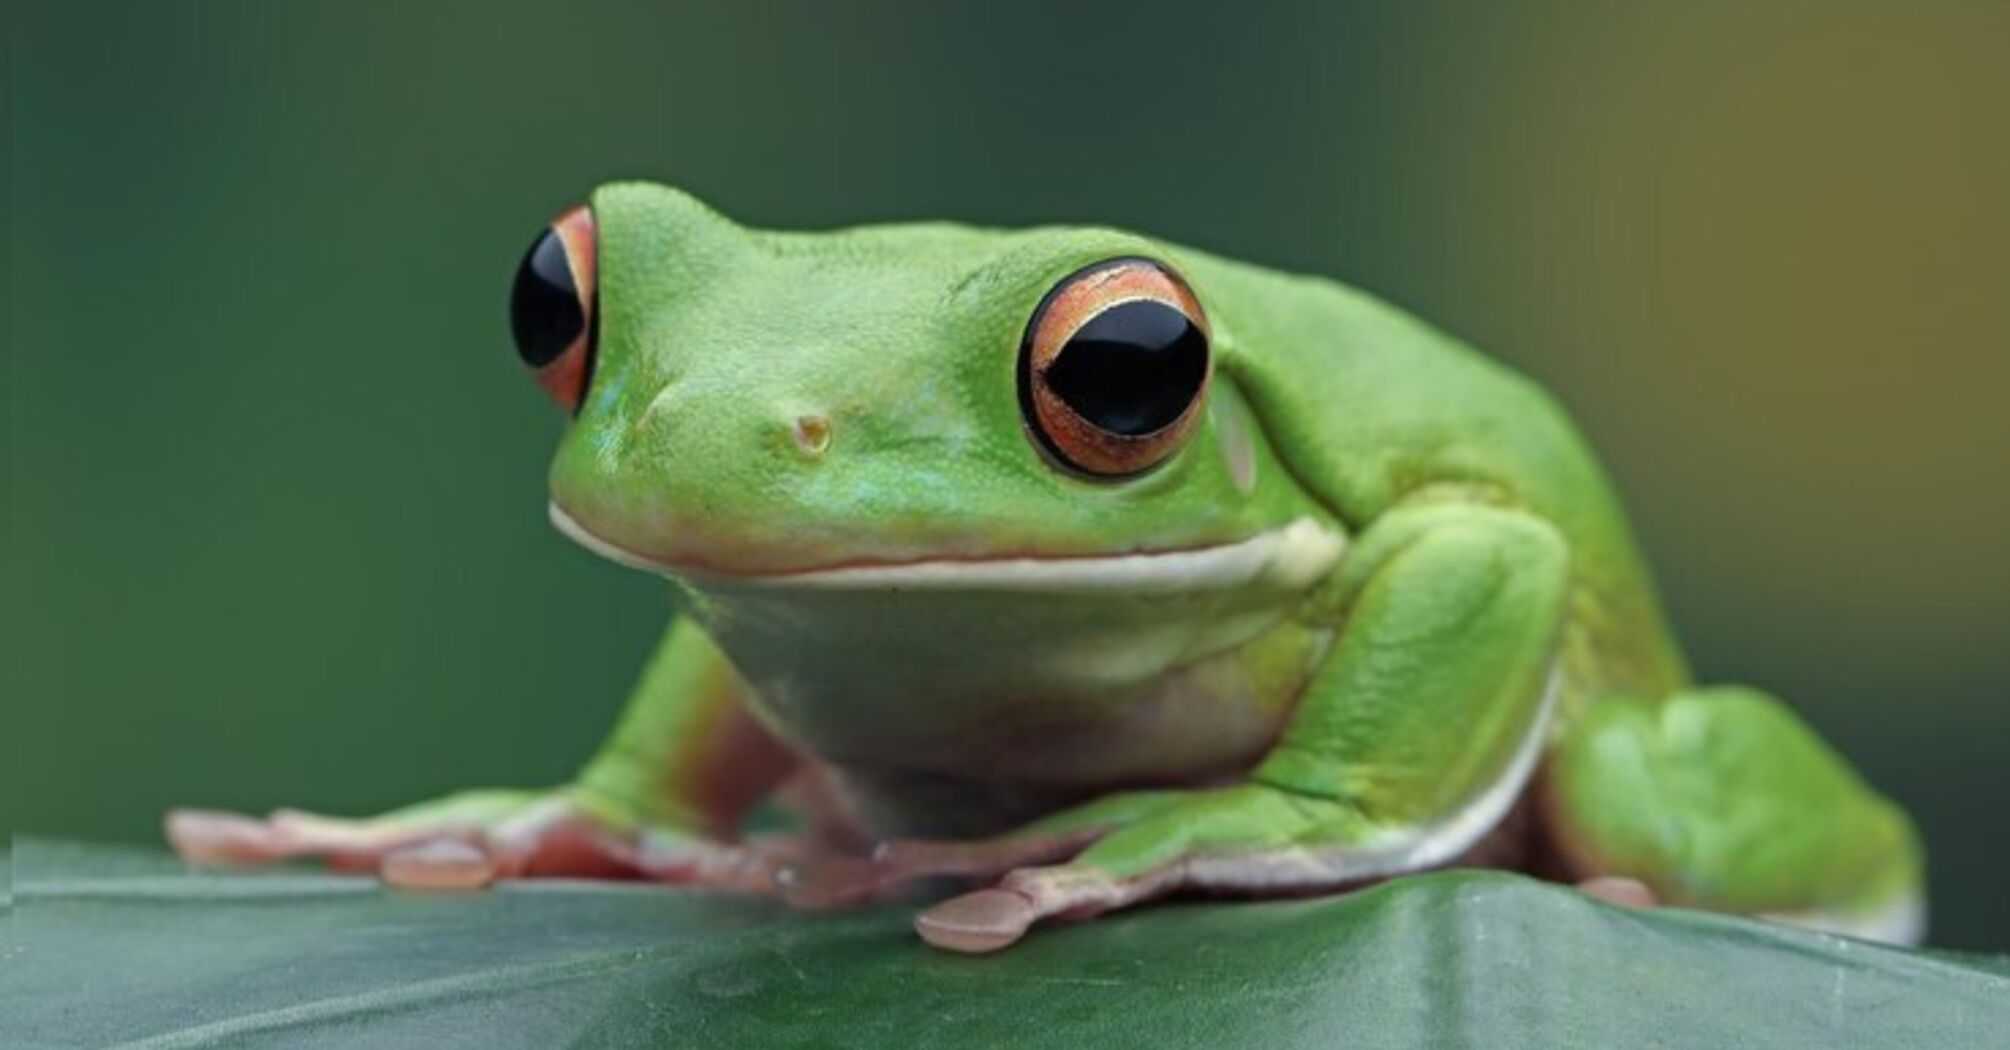 Chornobyl frogs have changed color